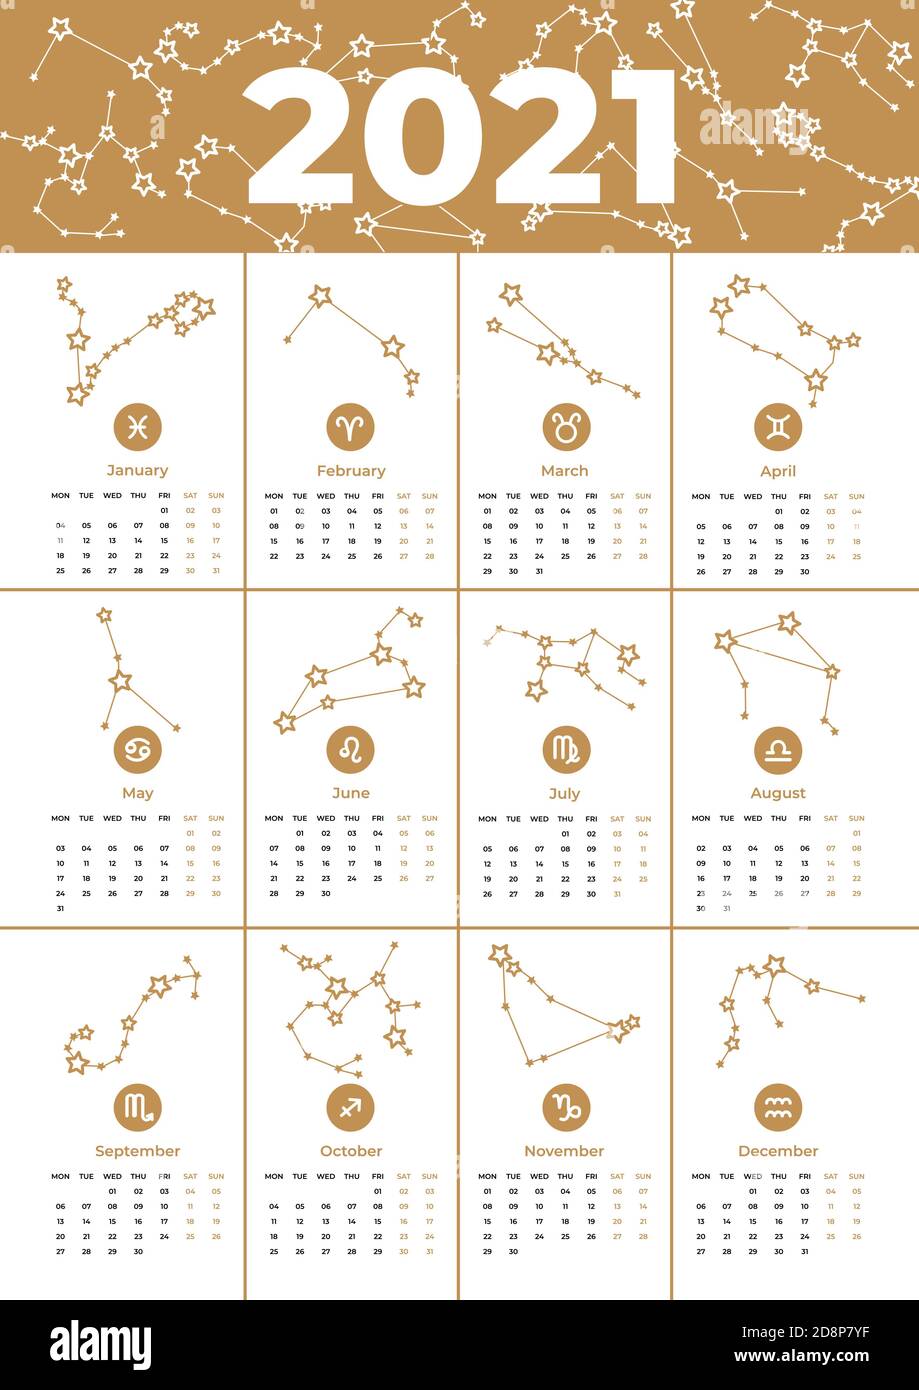 Vector calendar 2021 printable A3 template. Zodiac signs, stars, constellations of golden color. New Year's days. Astrological forecast, horoscope for Stock Vector